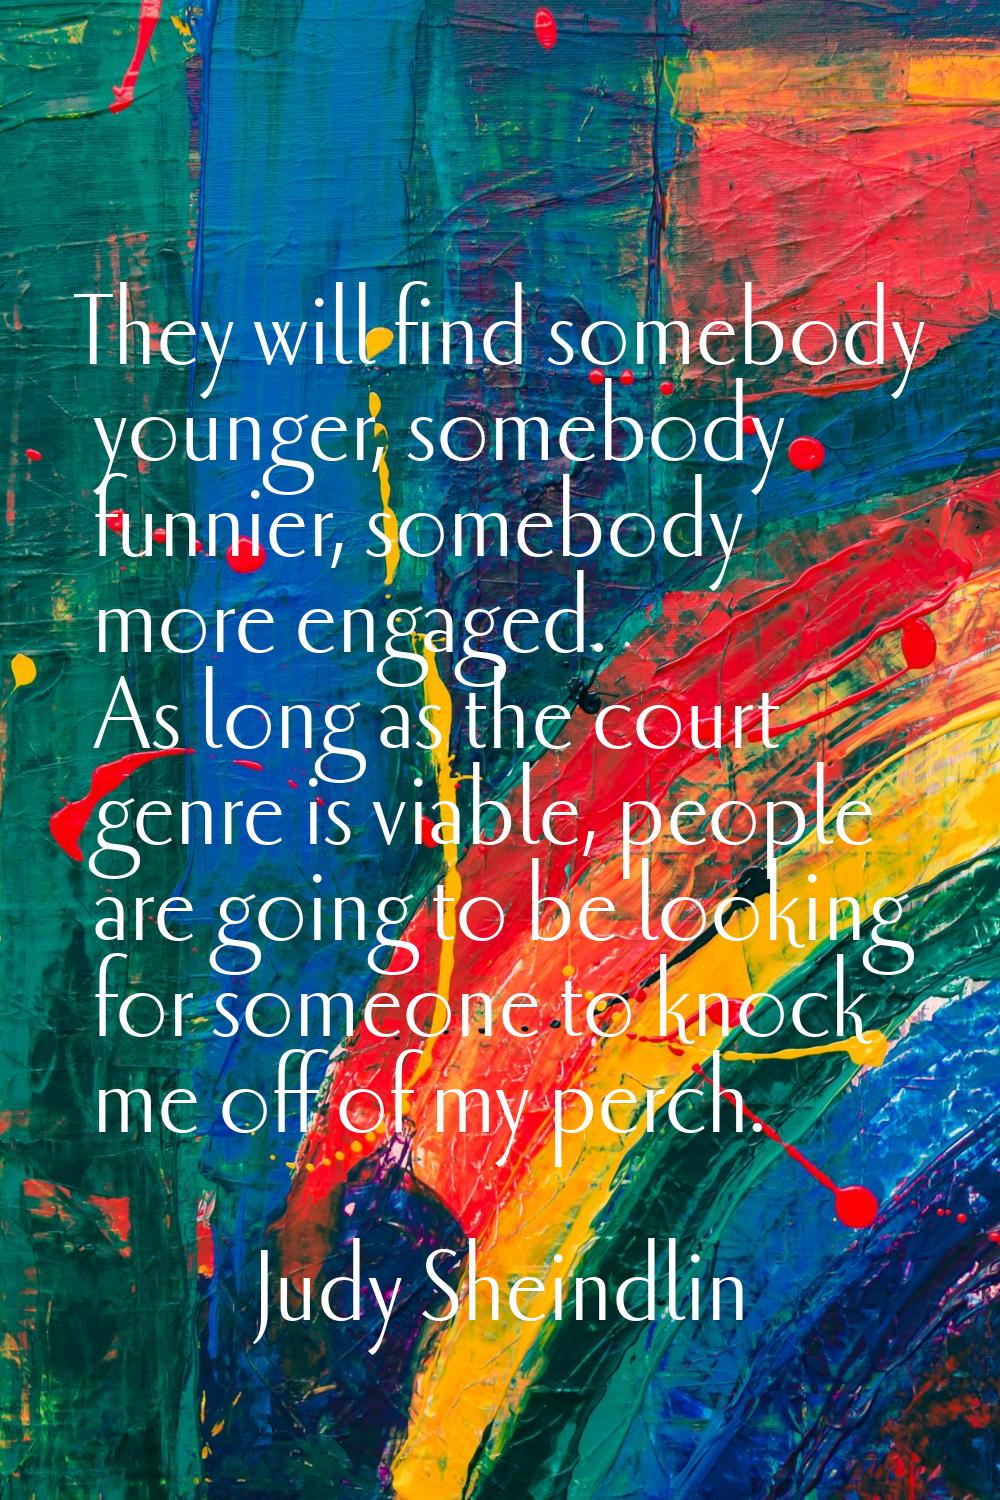 They will find somebody younger, somebody funnier, somebody more engaged. As long as the court genr